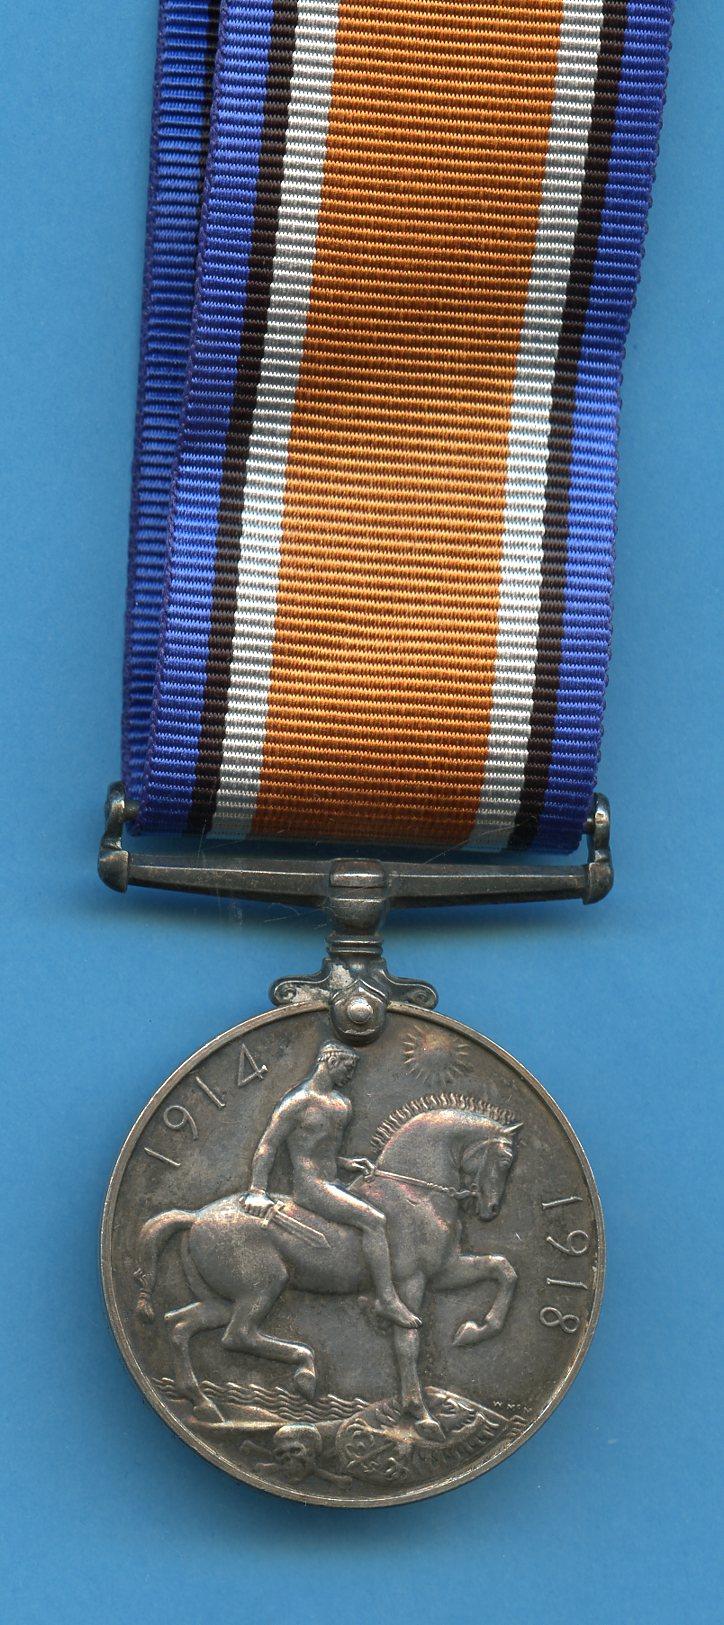 British War Medal 1914-18 To Sjt George Clapton Rayment, 1st London Sanitary Section Royal Army Medical Corps